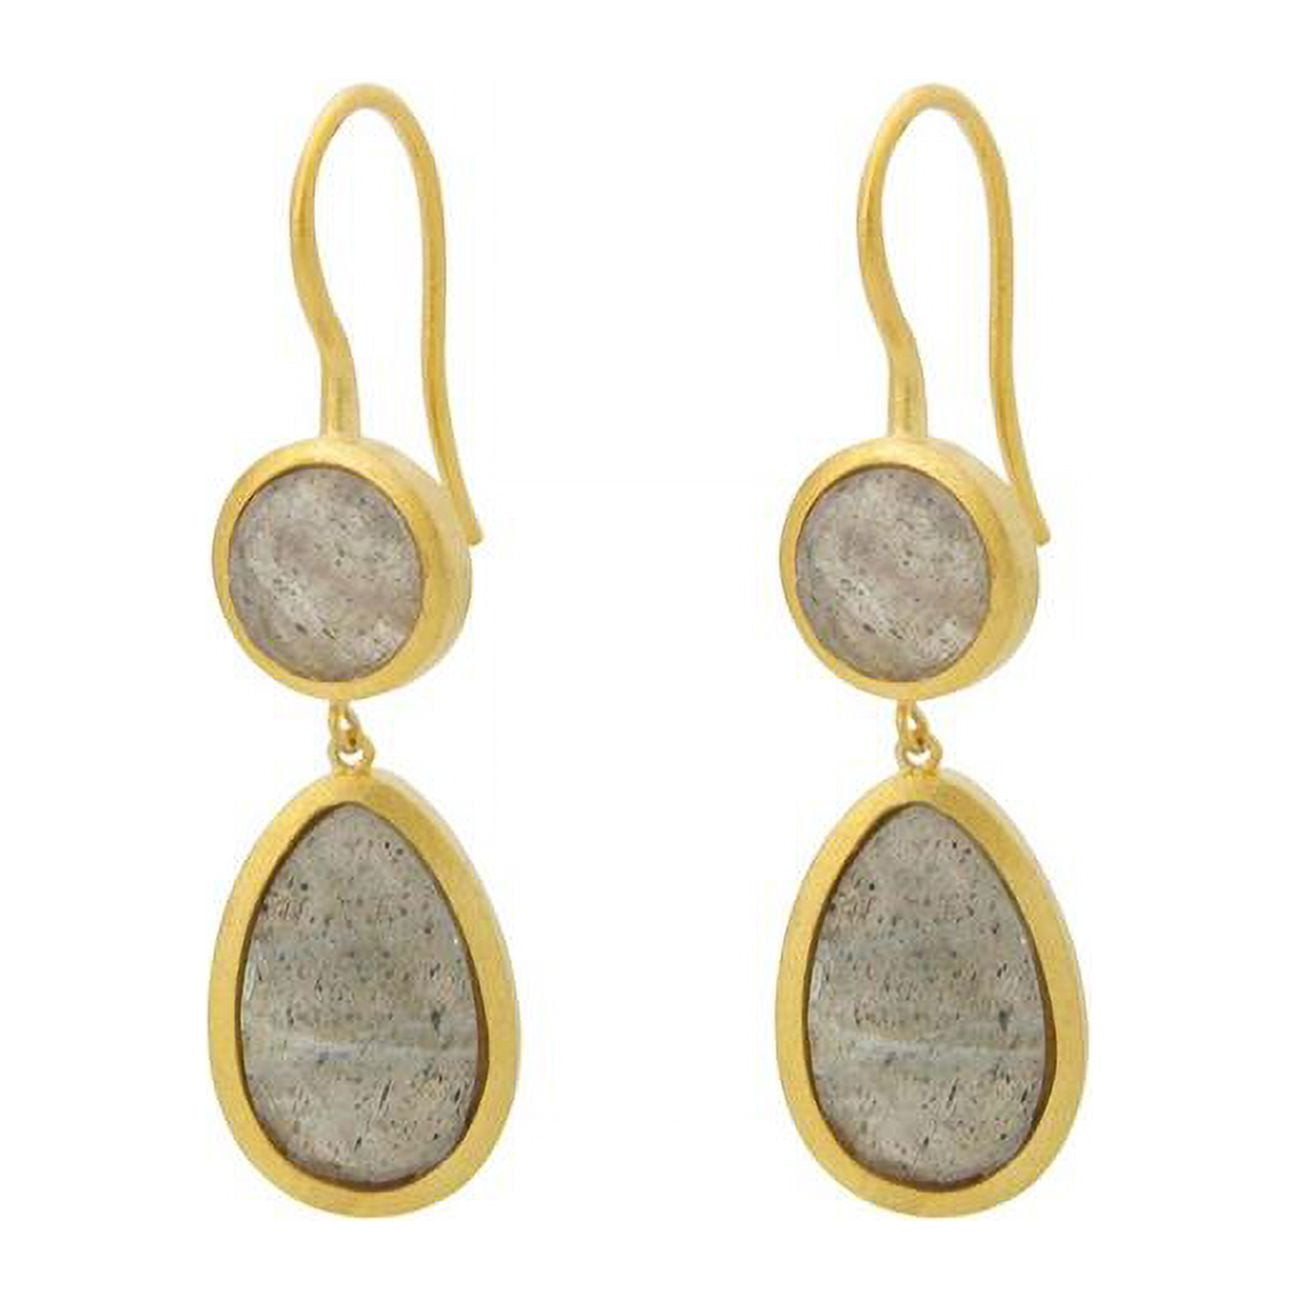 Picture of Fronay 215341 Natural Labradorite Double Drop Hook Earrings in Vermeil